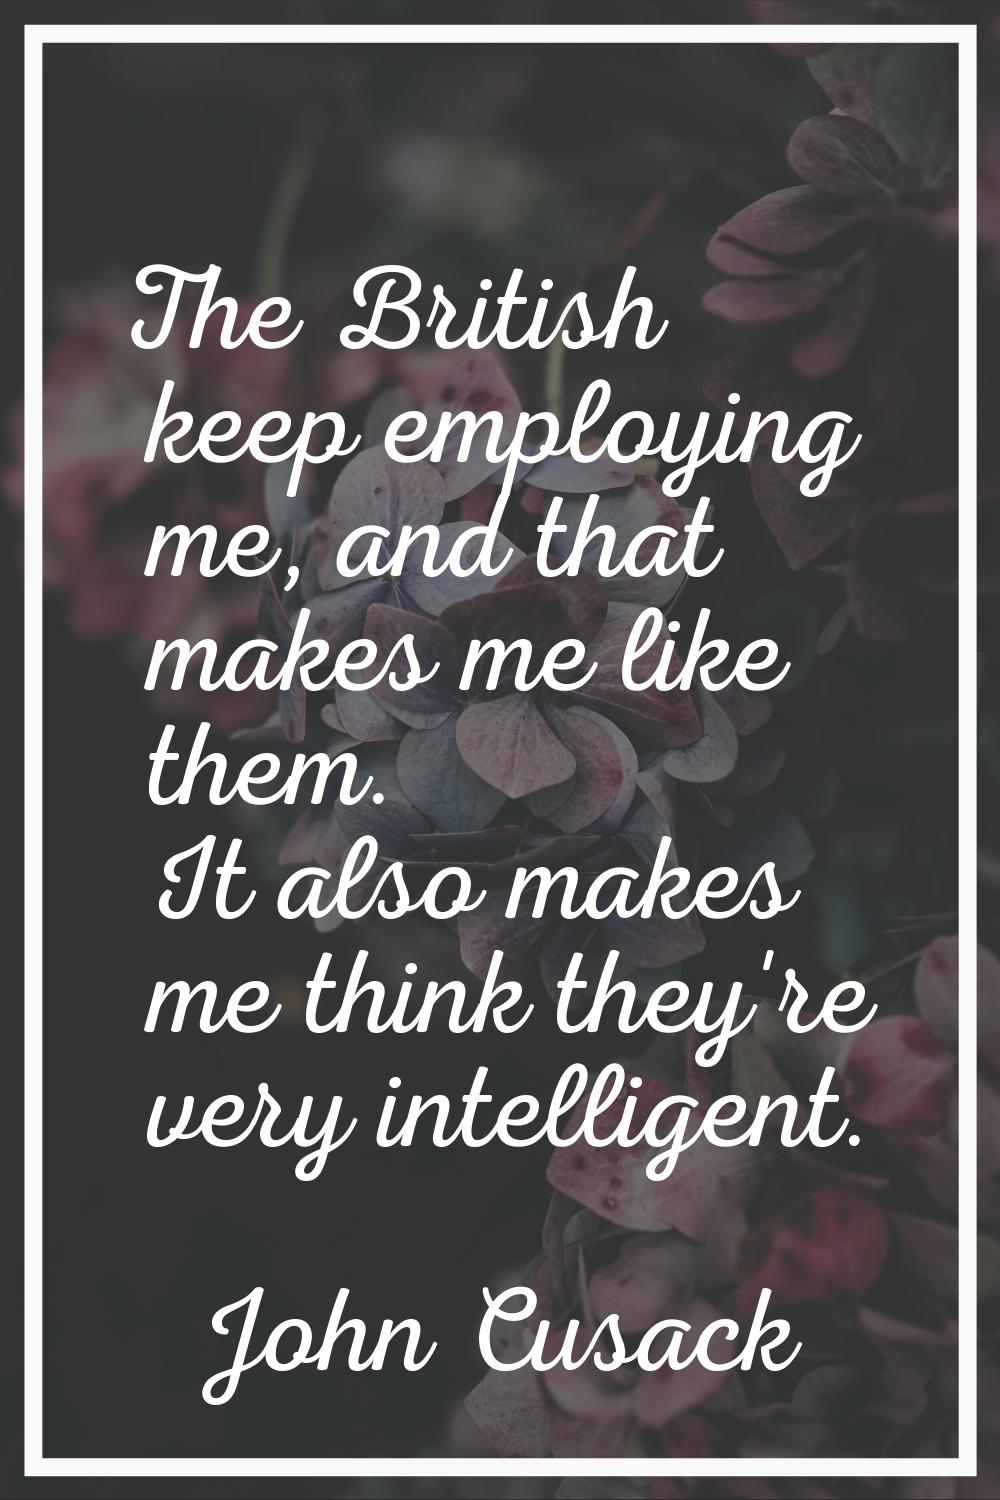 The British keep employing me, and that makes me like them. It also makes me think they're very int